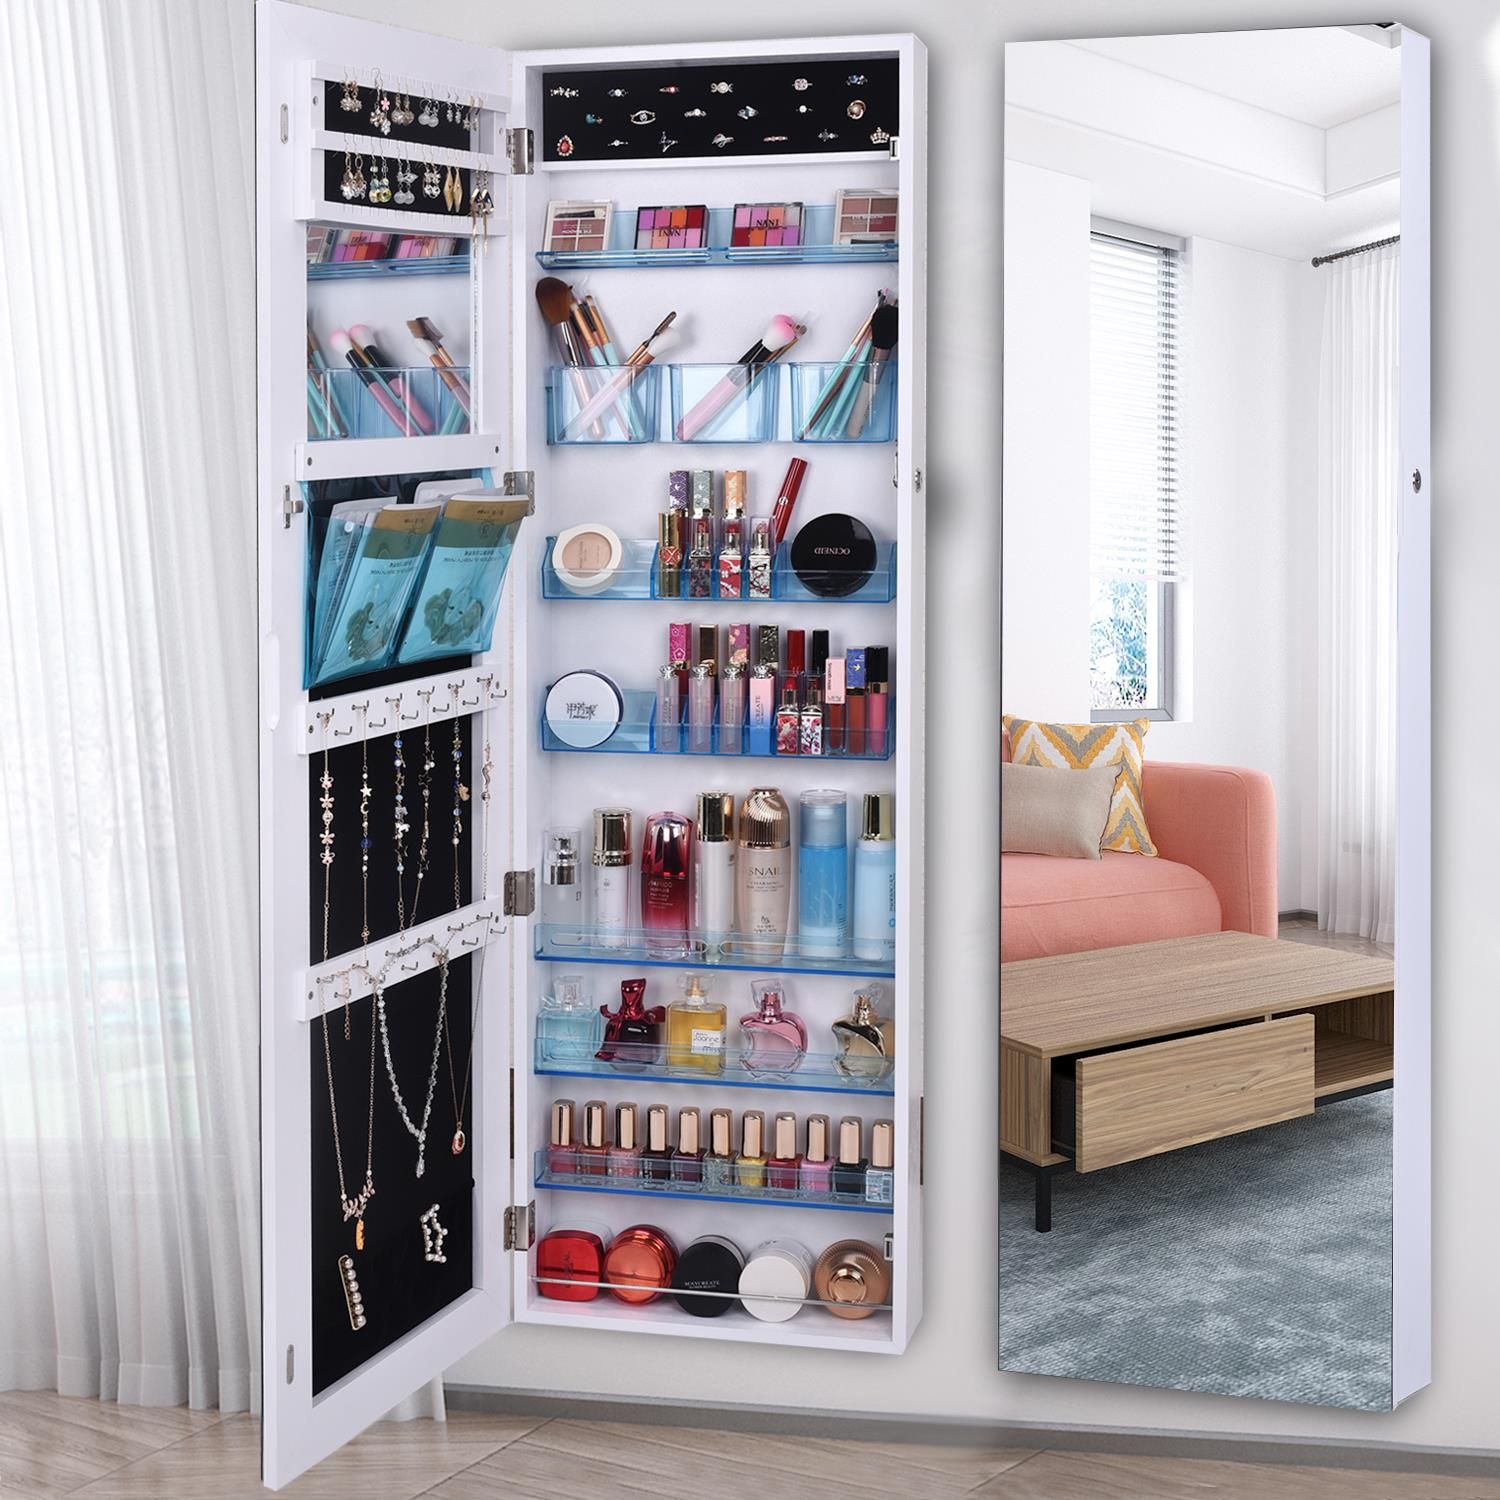 Ktaxon Mirrored Jewelry Armoire Wall Cabinet Acrylic Storage Makeup Pertaining To Hallas Wall Organizer Mirrors (View 3 of 15)